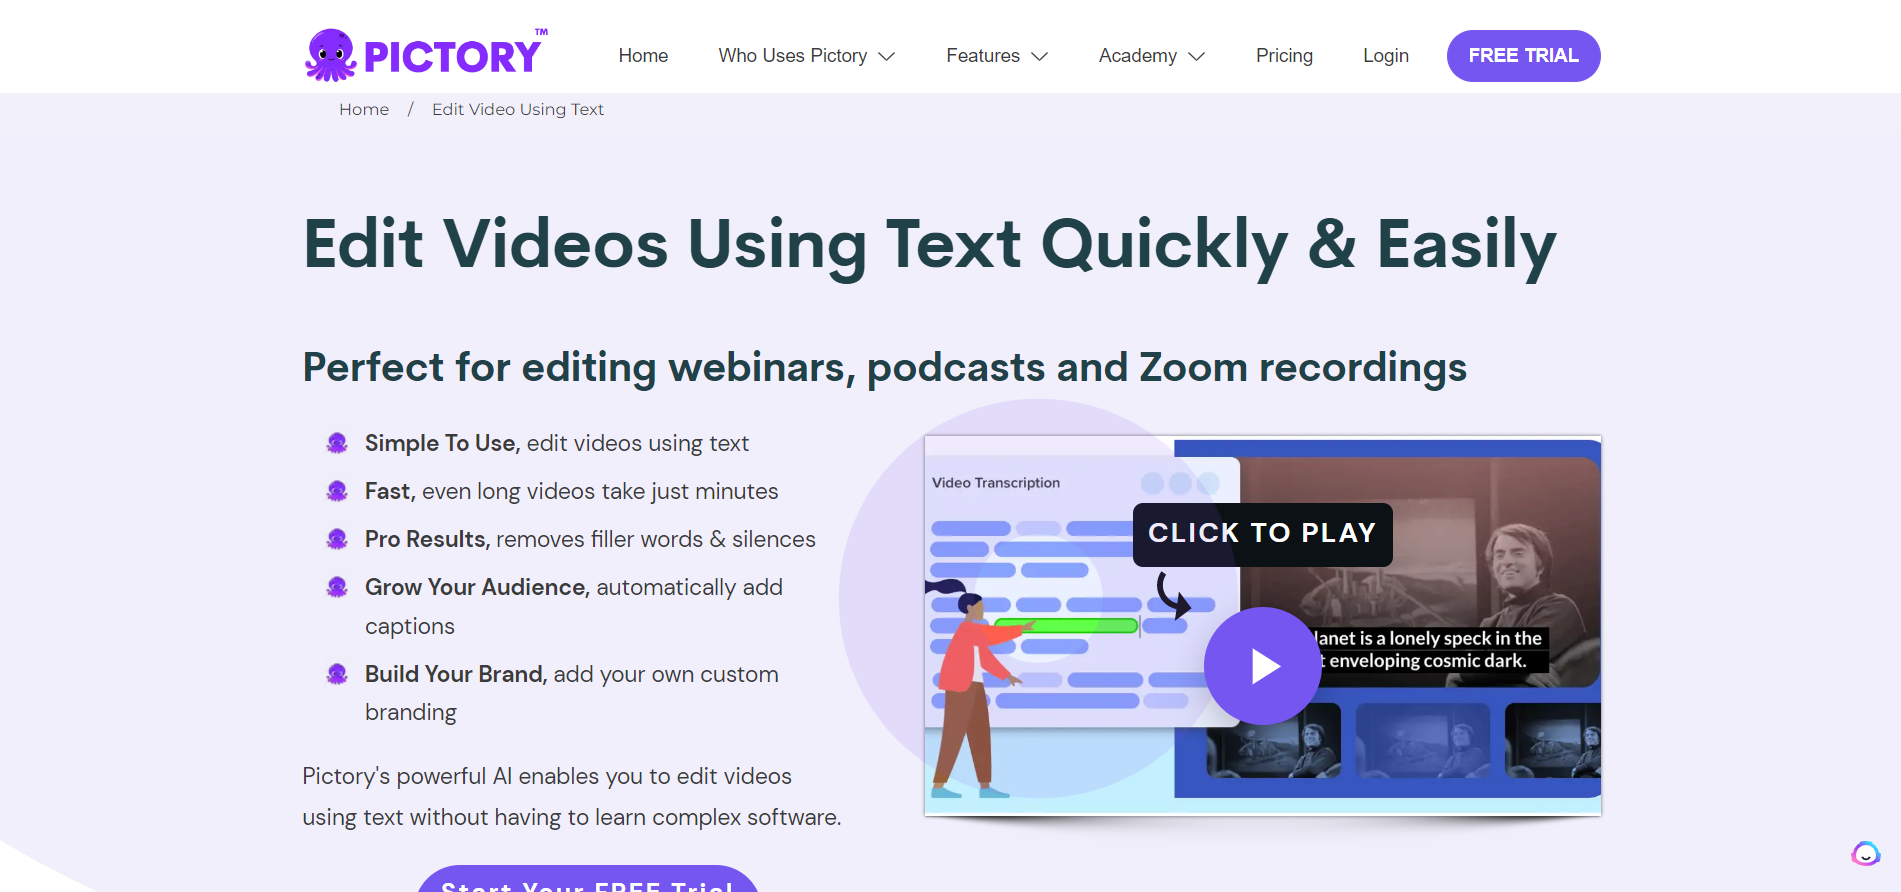 Pictory.ai - edit videos using text